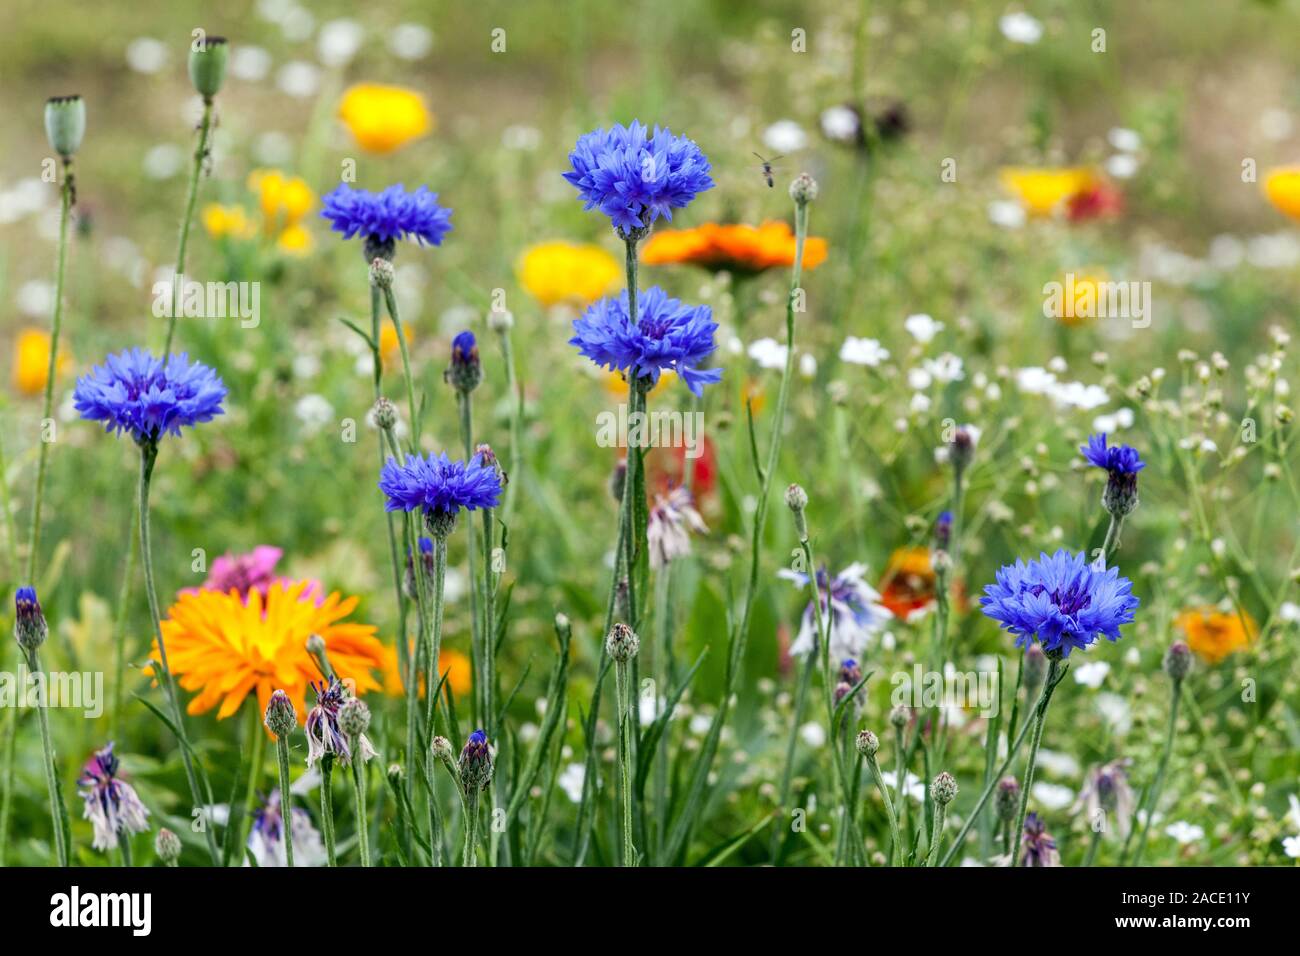 Bachelor's Buttons Centaurea cyanus in colorful flower bed summer meadow flowers Stock Photo